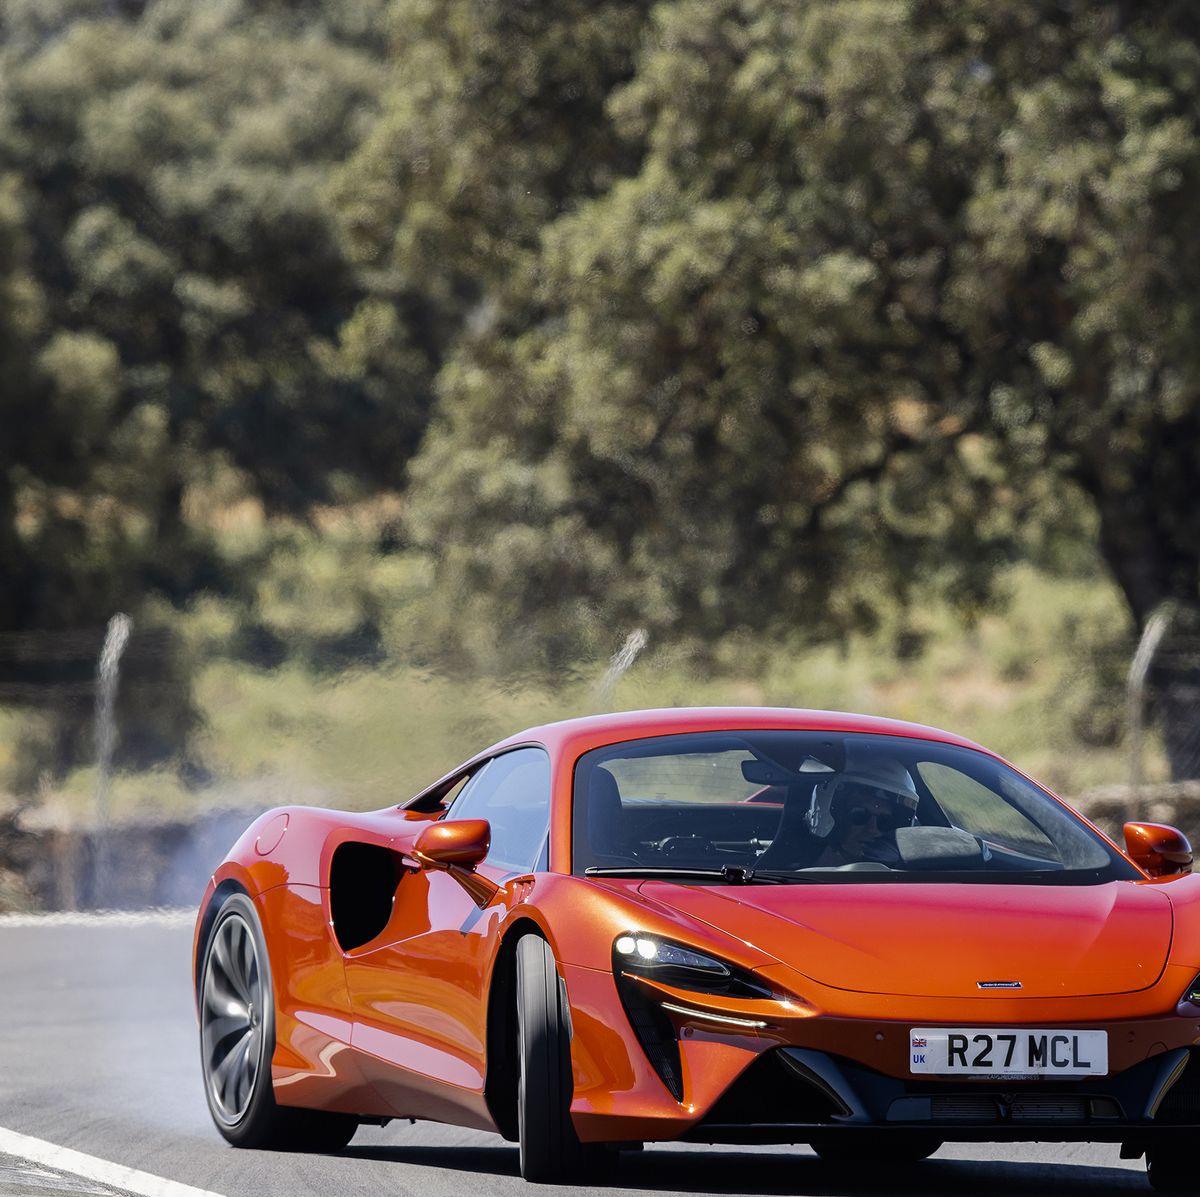 McLaren Cars and SUV List: Price, Reviews, and Specs